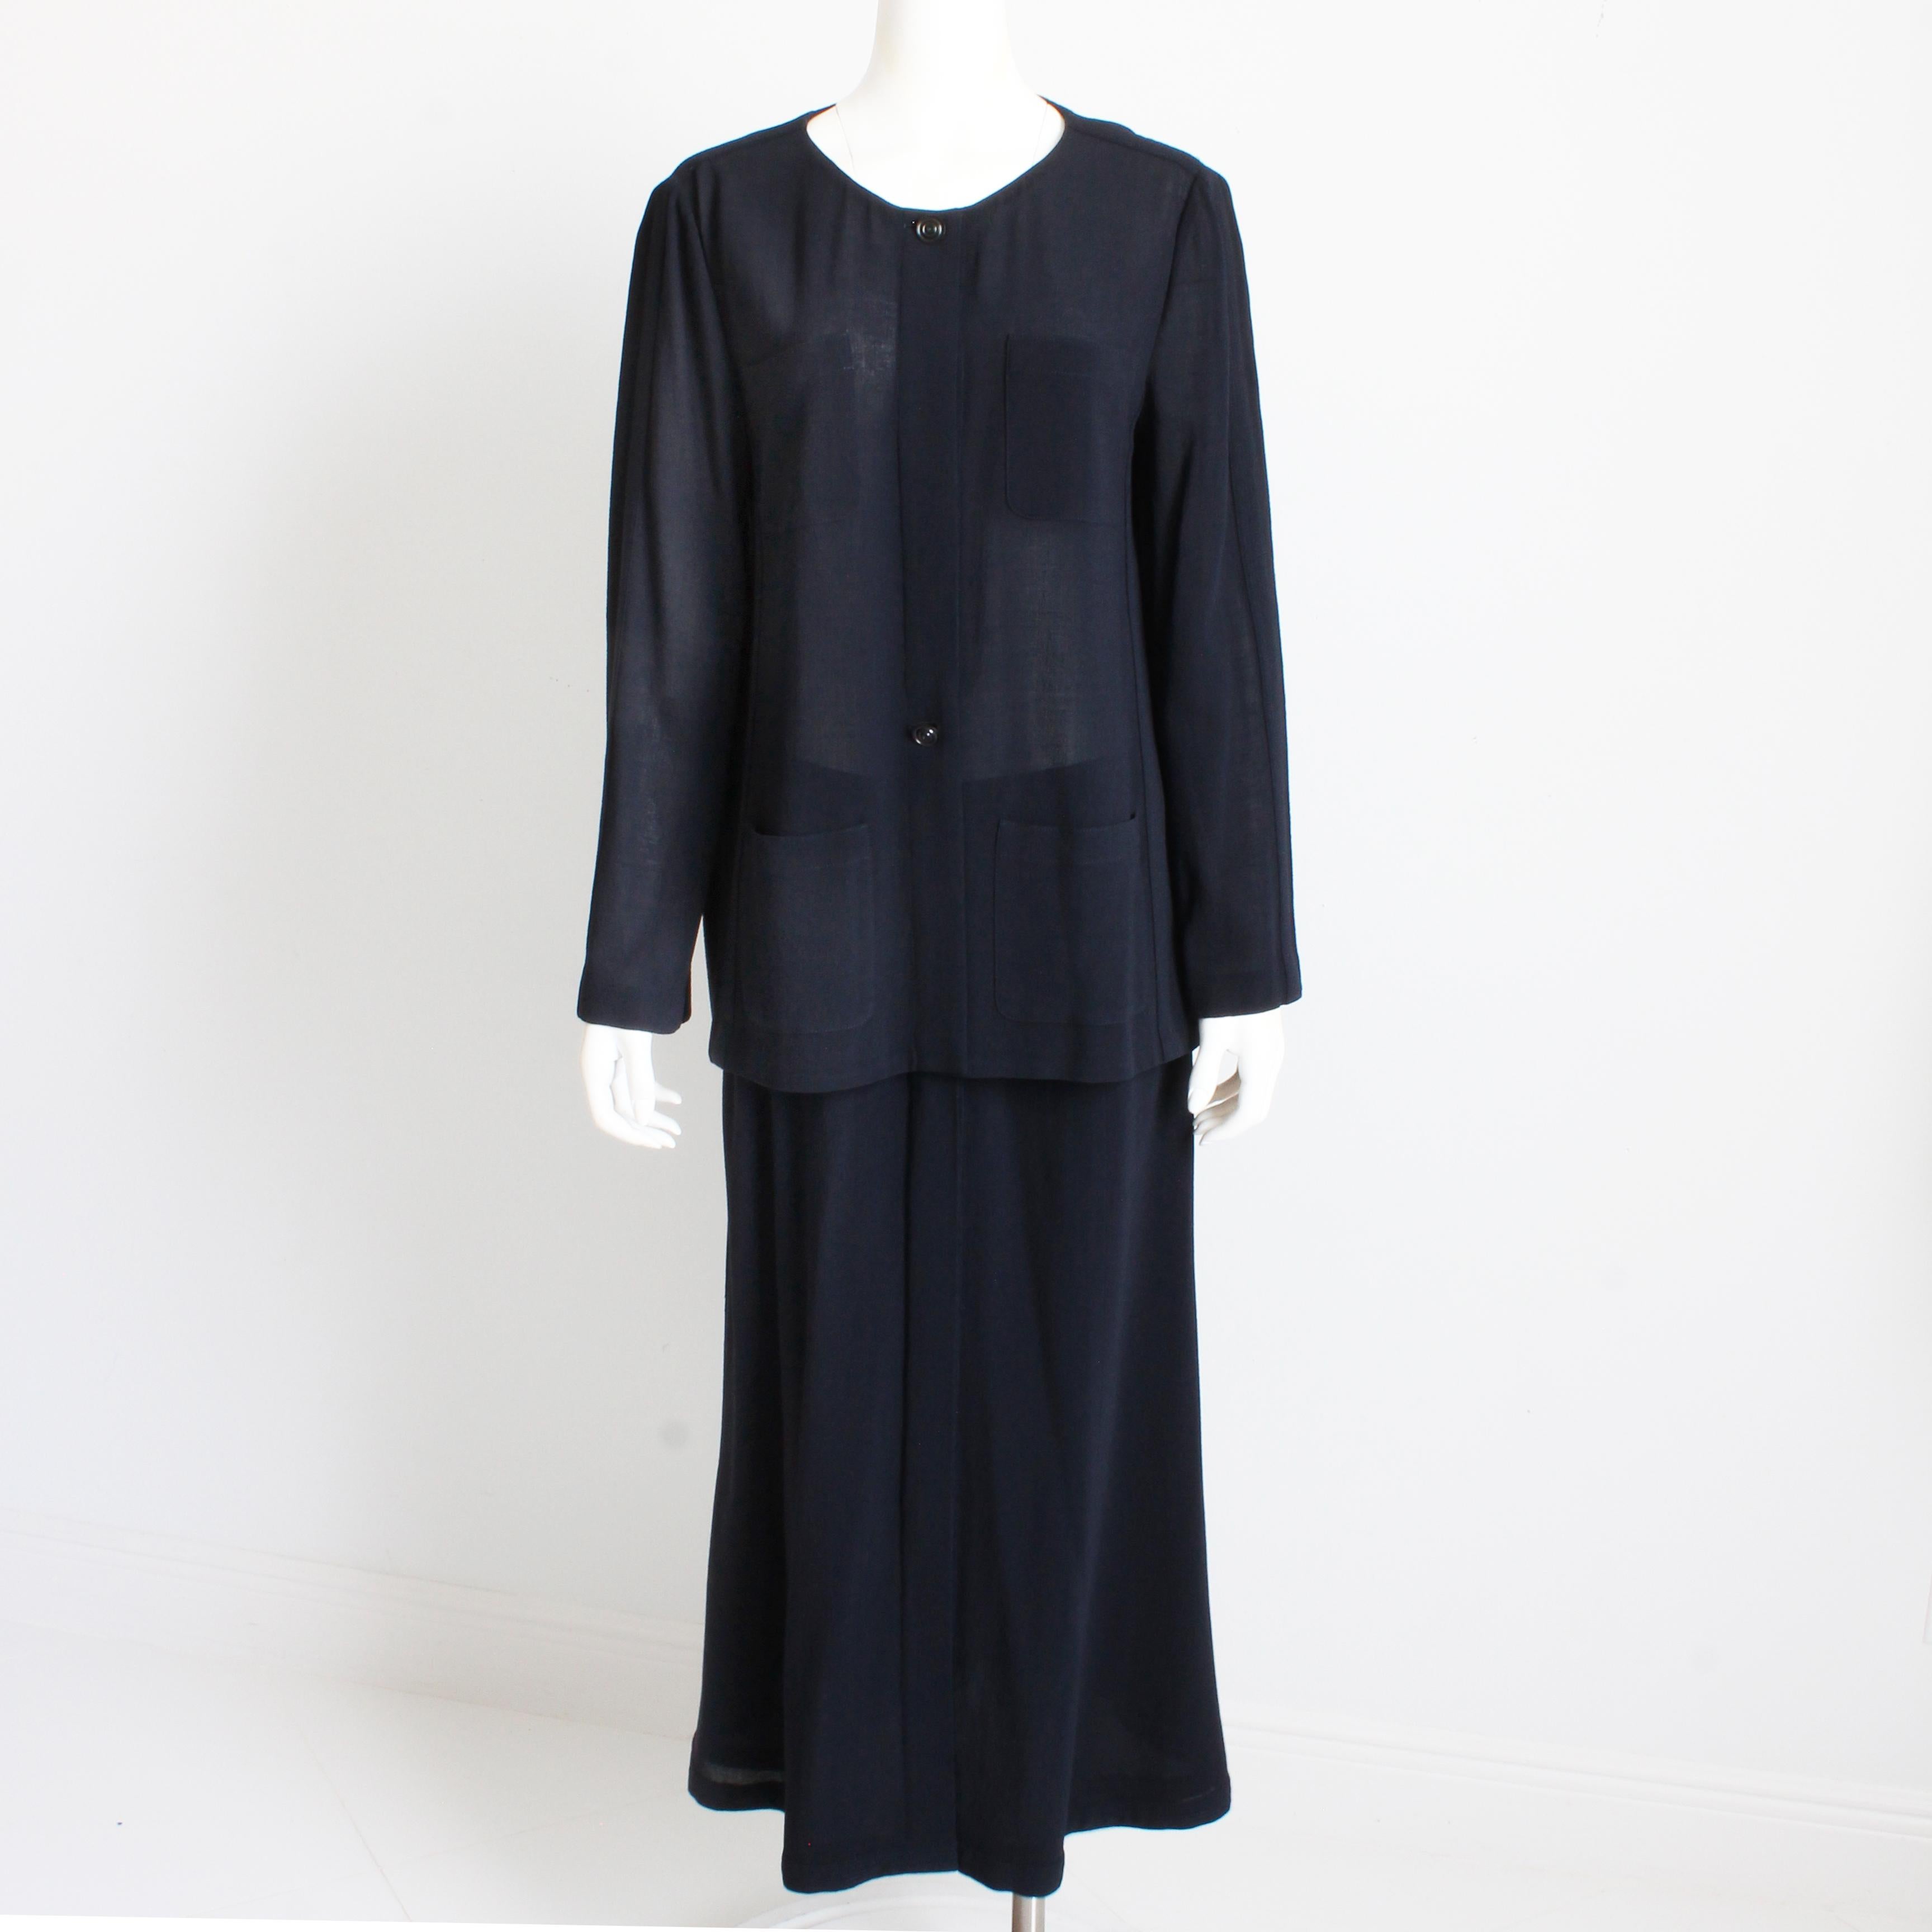 Chanel Jacket + Skirt Suit 2pc Sheer Wool Crepe Button Front Navy Blue 99P Sz 44 In Good Condition For Sale In Port Saint Lucie, FL